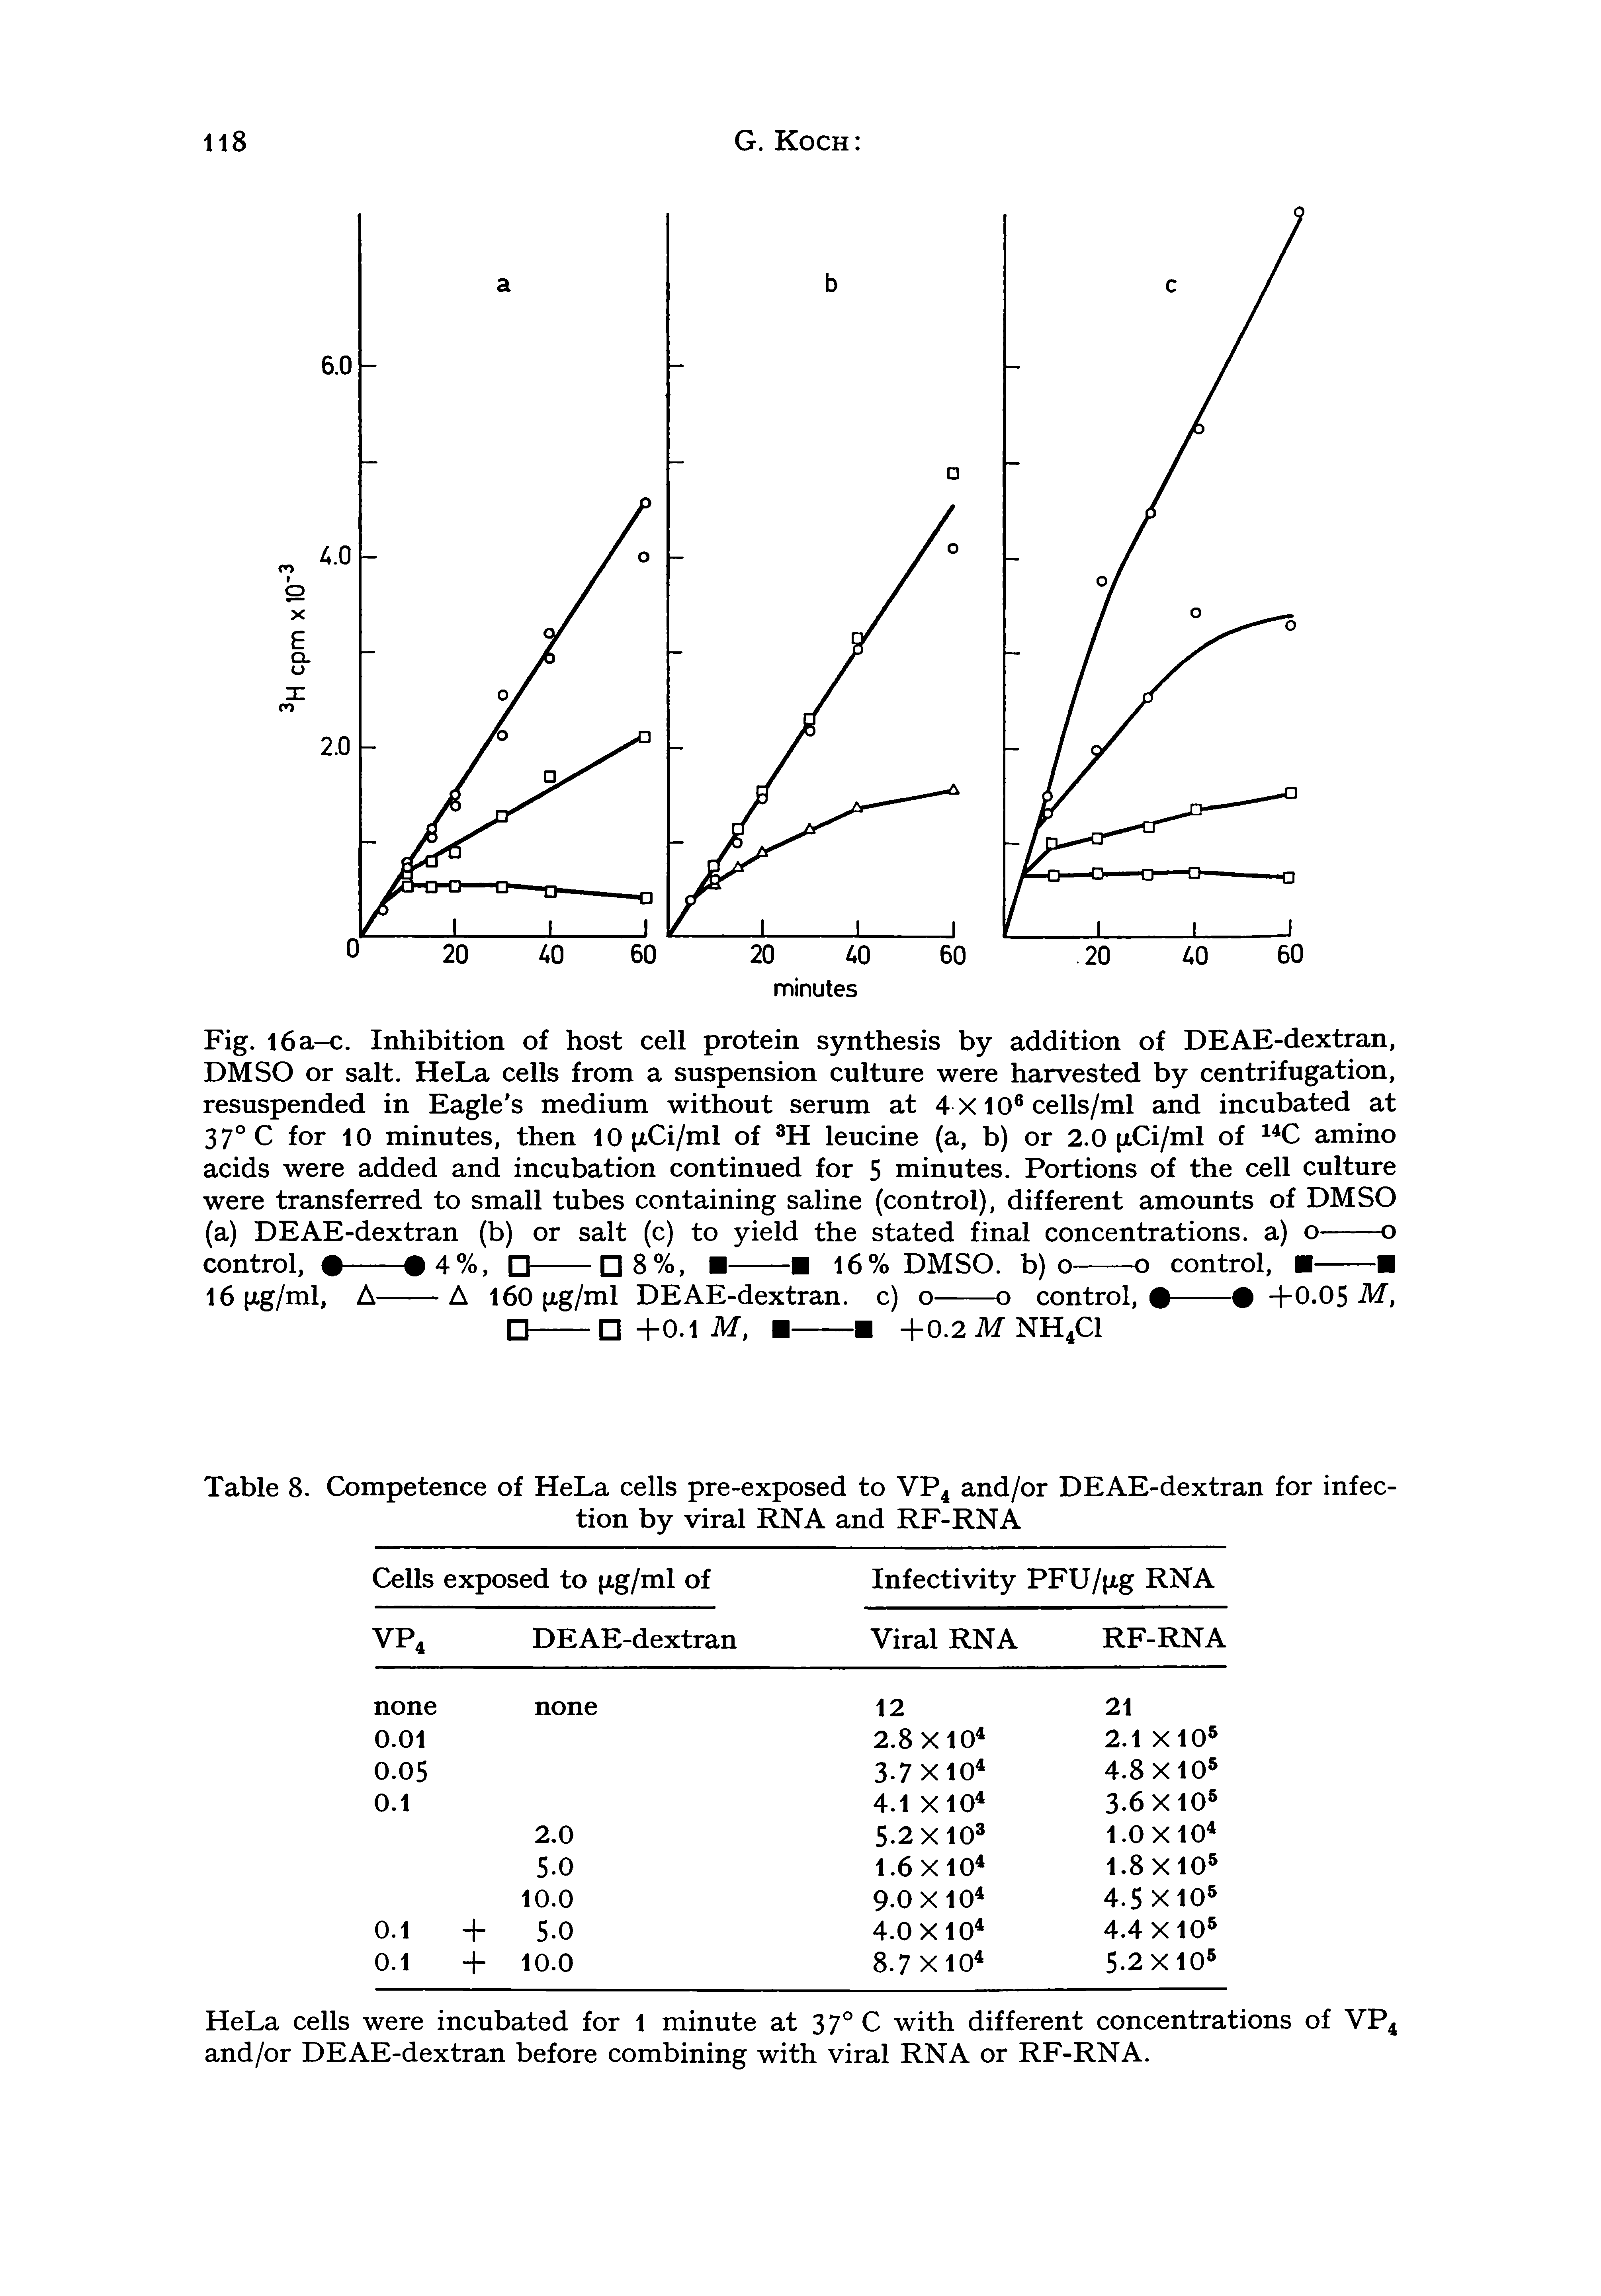 Fig. I6a-c. Inhibition of host cell protein synthesis by addition of DEAE-dextran, DM SO or salt. HeLa cells from a suspension culture were harvested by centrifugation, resuspended in Eagle s medium without serum at 4 X10 cells/ml and incubated at 37° C for 10 minutes, then 10 (xCi/ml of leucine (a, b) or 2.0 (xCi/ml of amino acids were added and incubation continued for 5 minutes. Portions of the cell culture were transferred to small tubes containing saline (control), different amounts of DM SO...